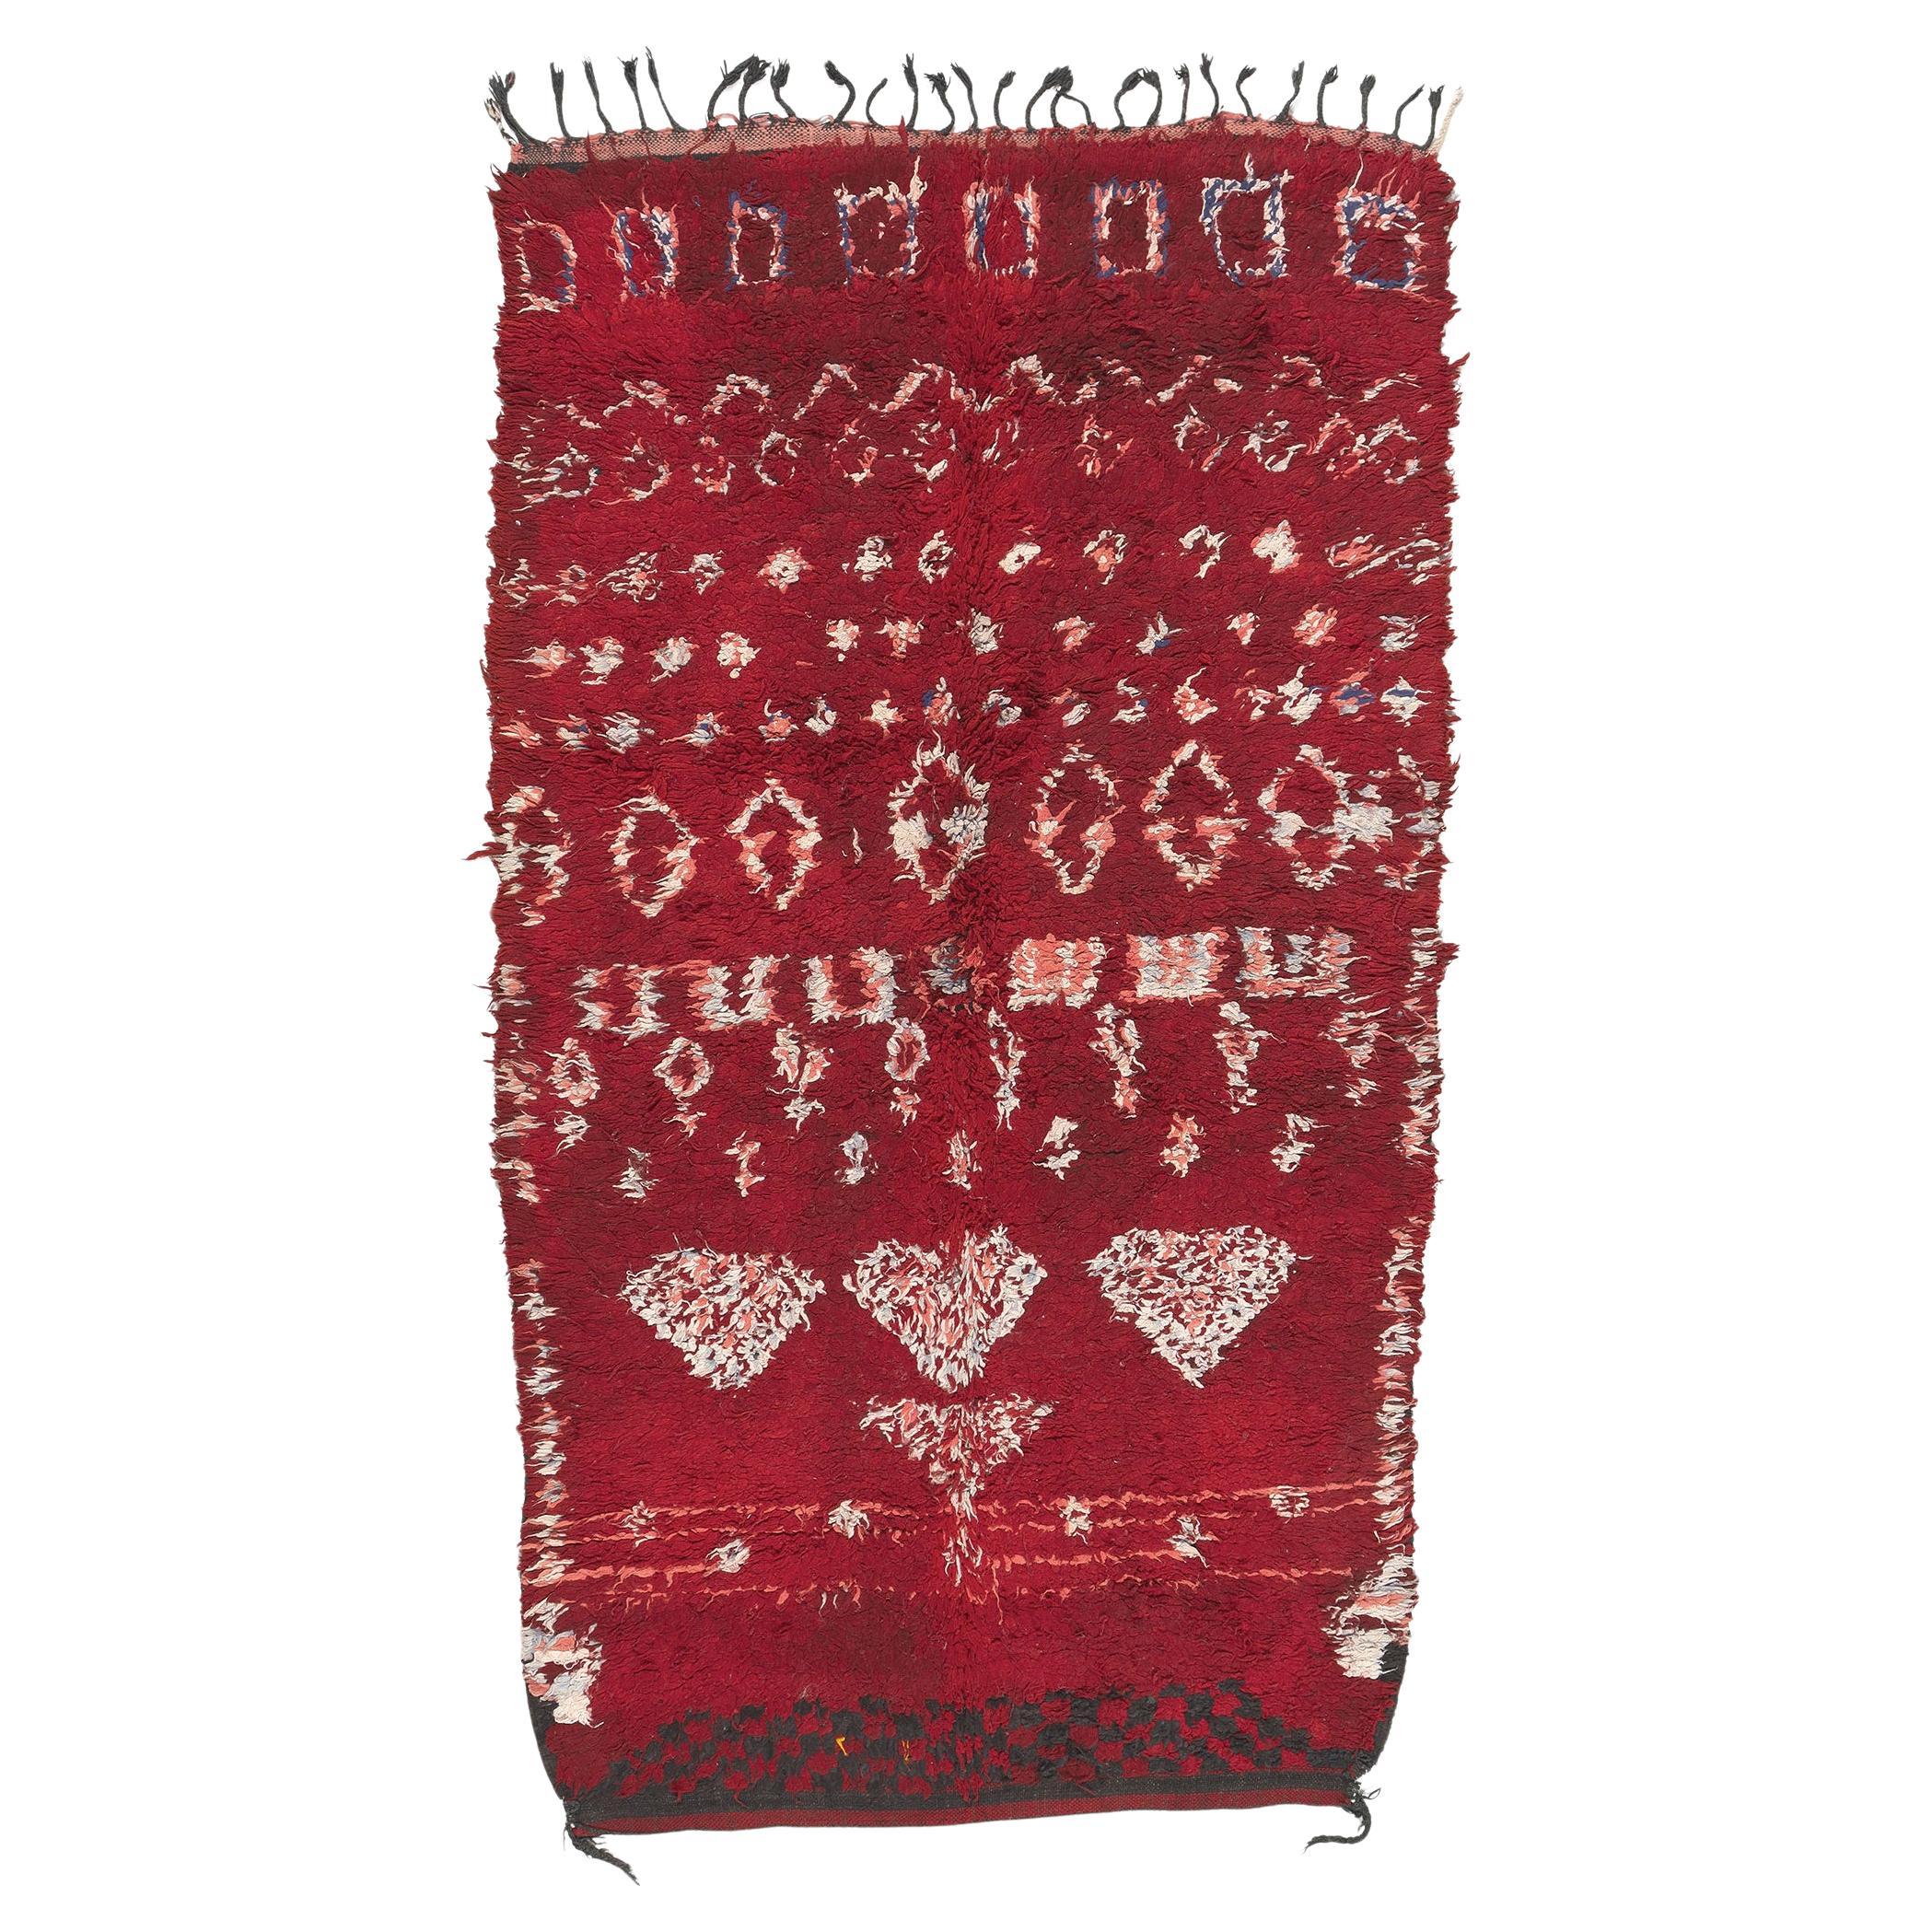 Vintage Red Talsint Moroccan Rug, Cozy Boho Chic Meets Maximalist Style